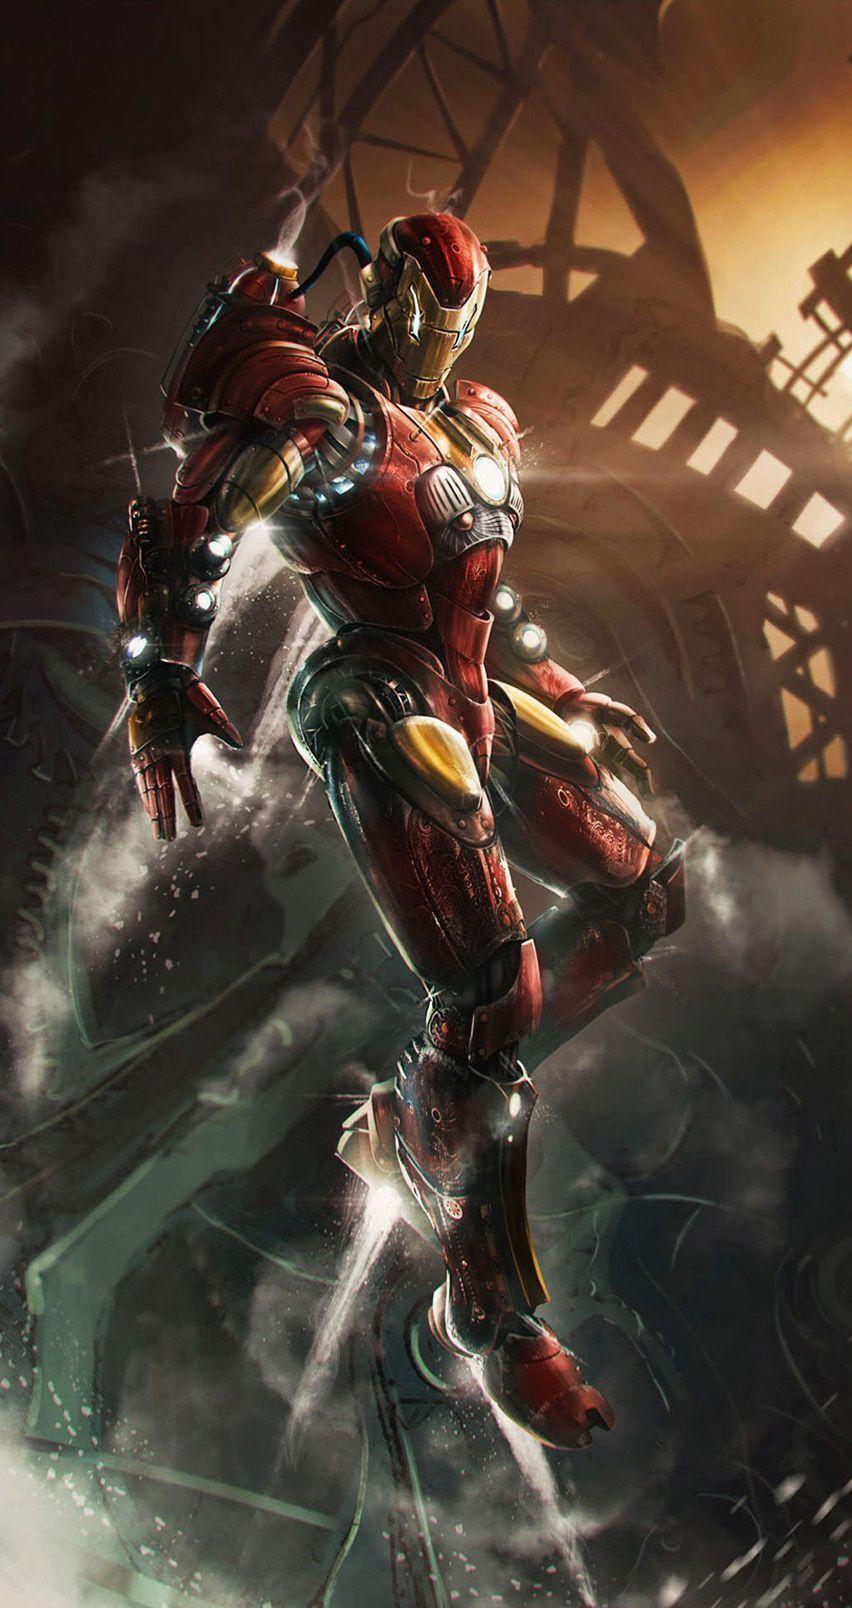 Avengers Ironman Wallpaper For IPhone 5 5s, IPhone 6 6 Plus. Tap To